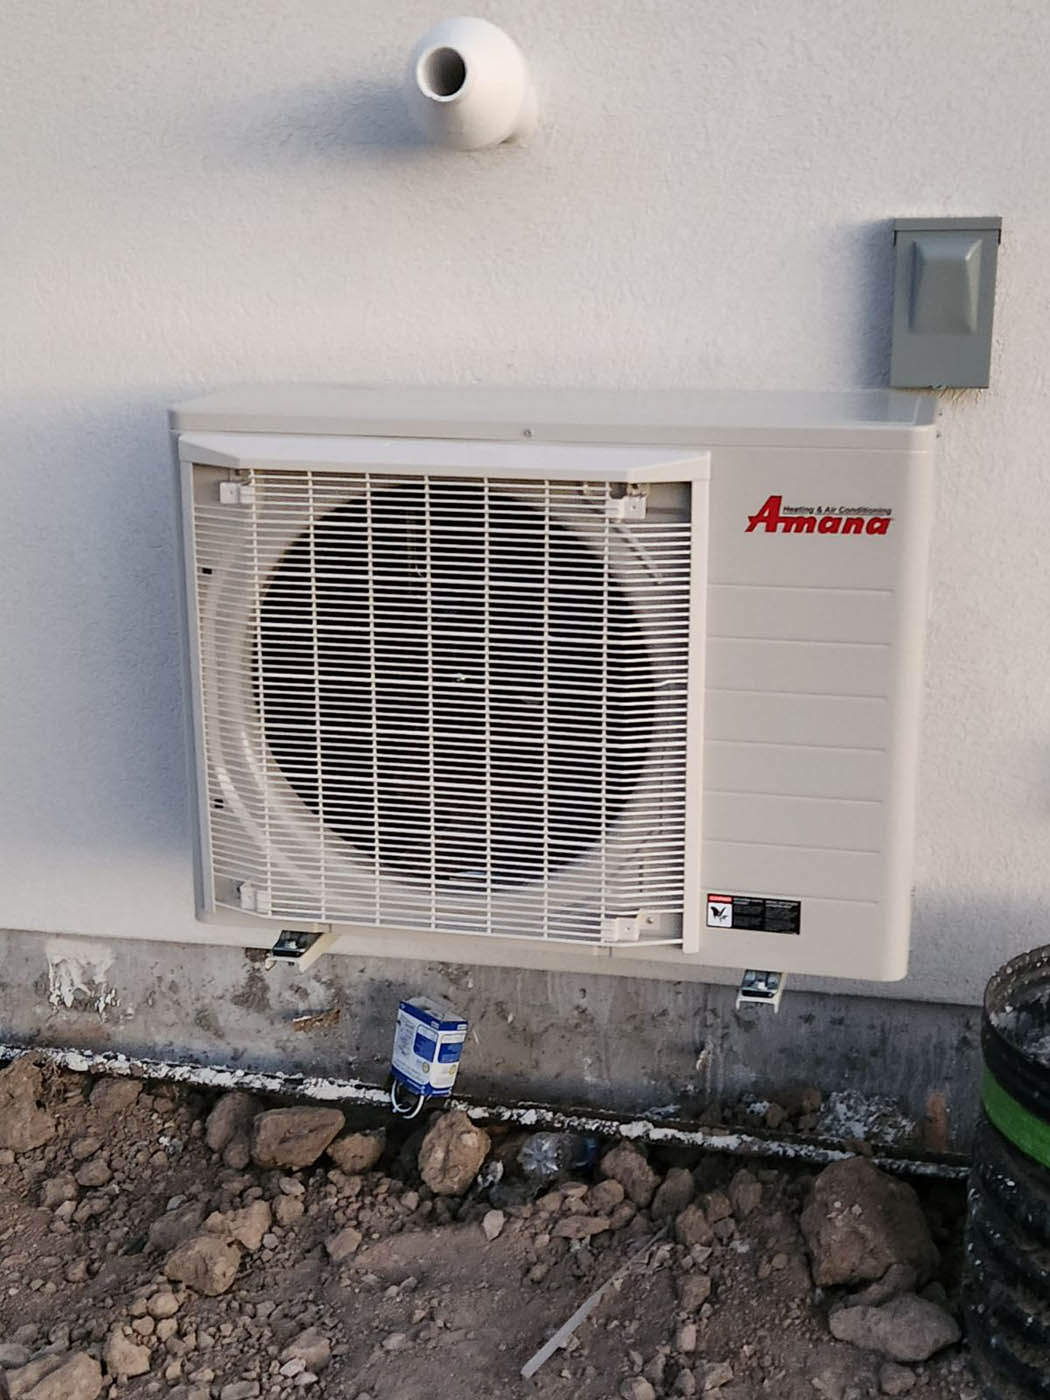 
		An image of our high-quality Amana products - we offer professional hvac repair.
	